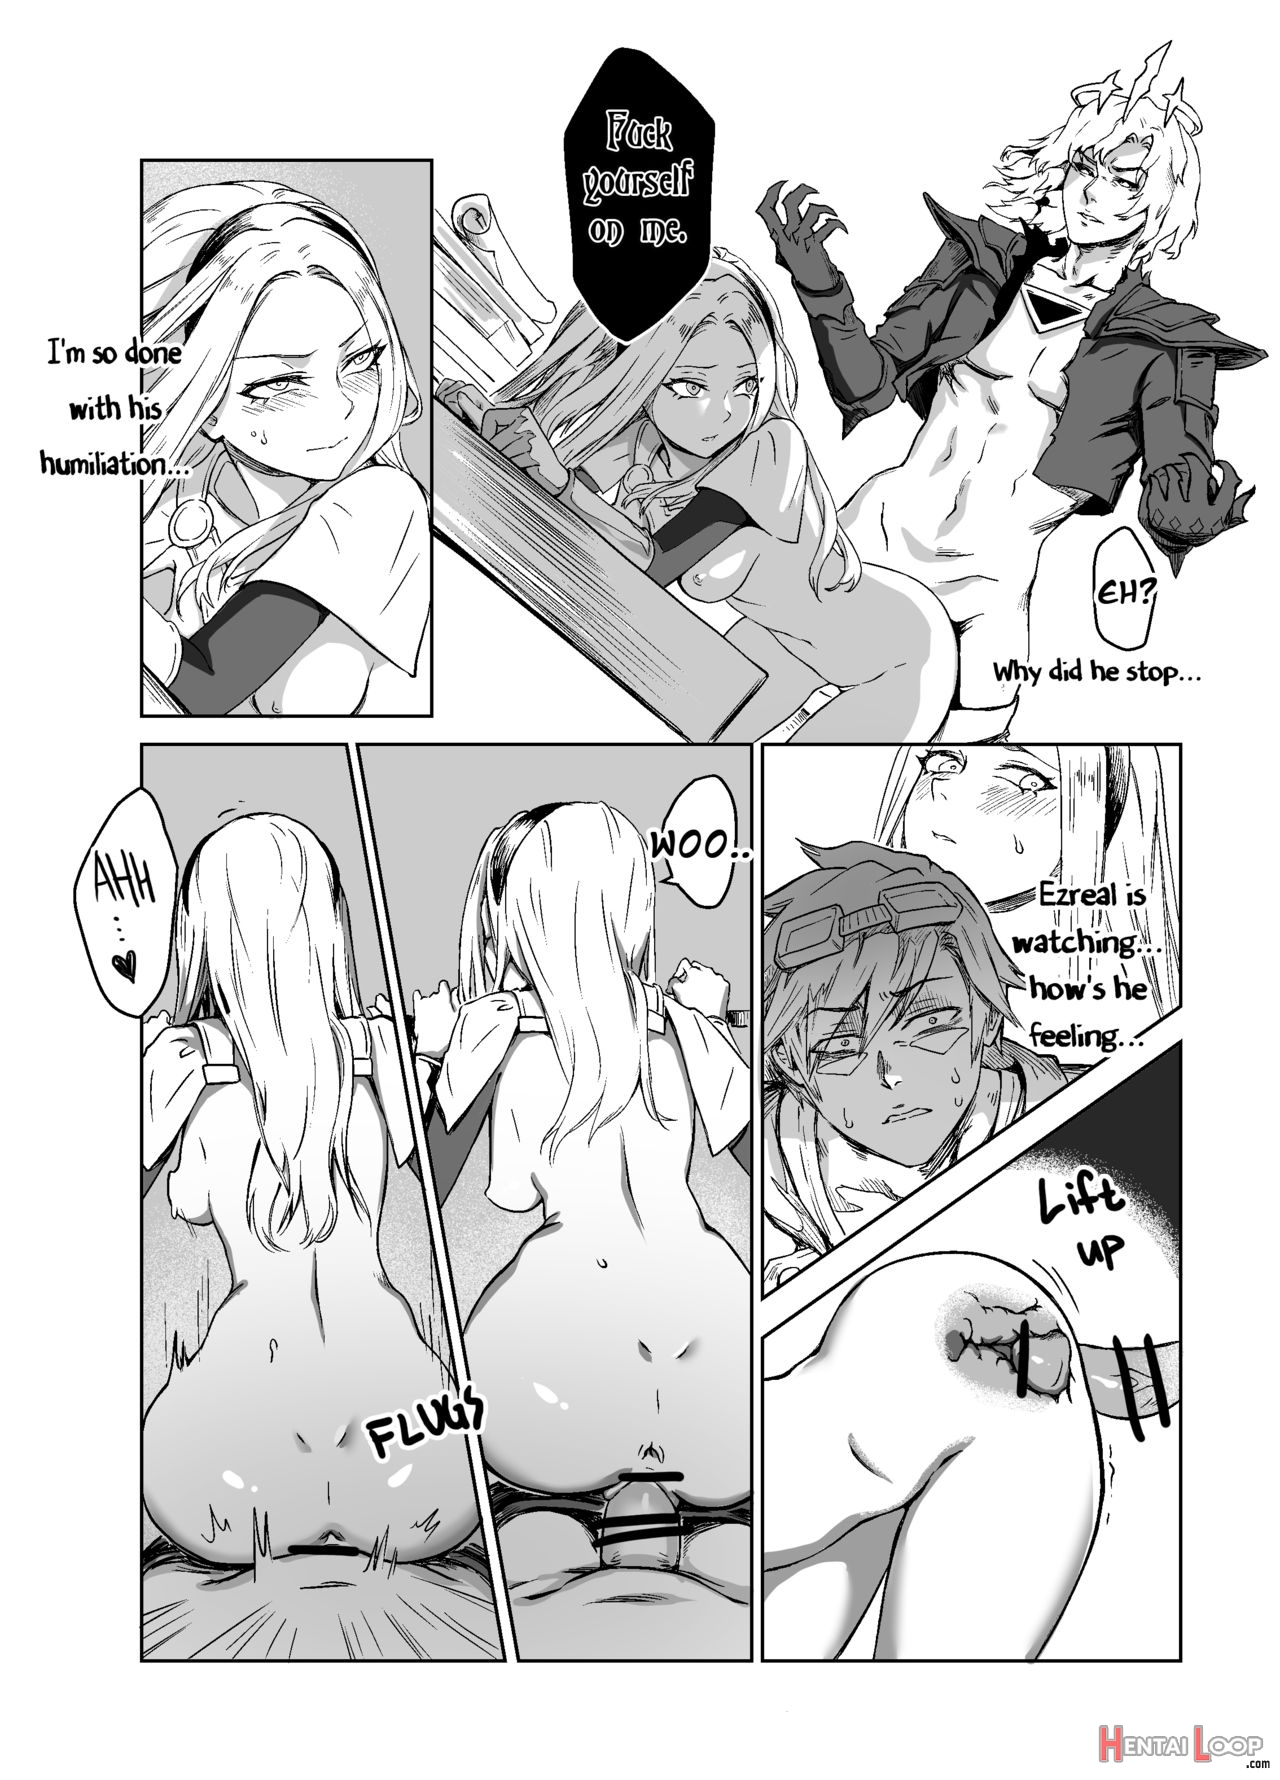 Lux X Viego Ft. Ezreal page 14